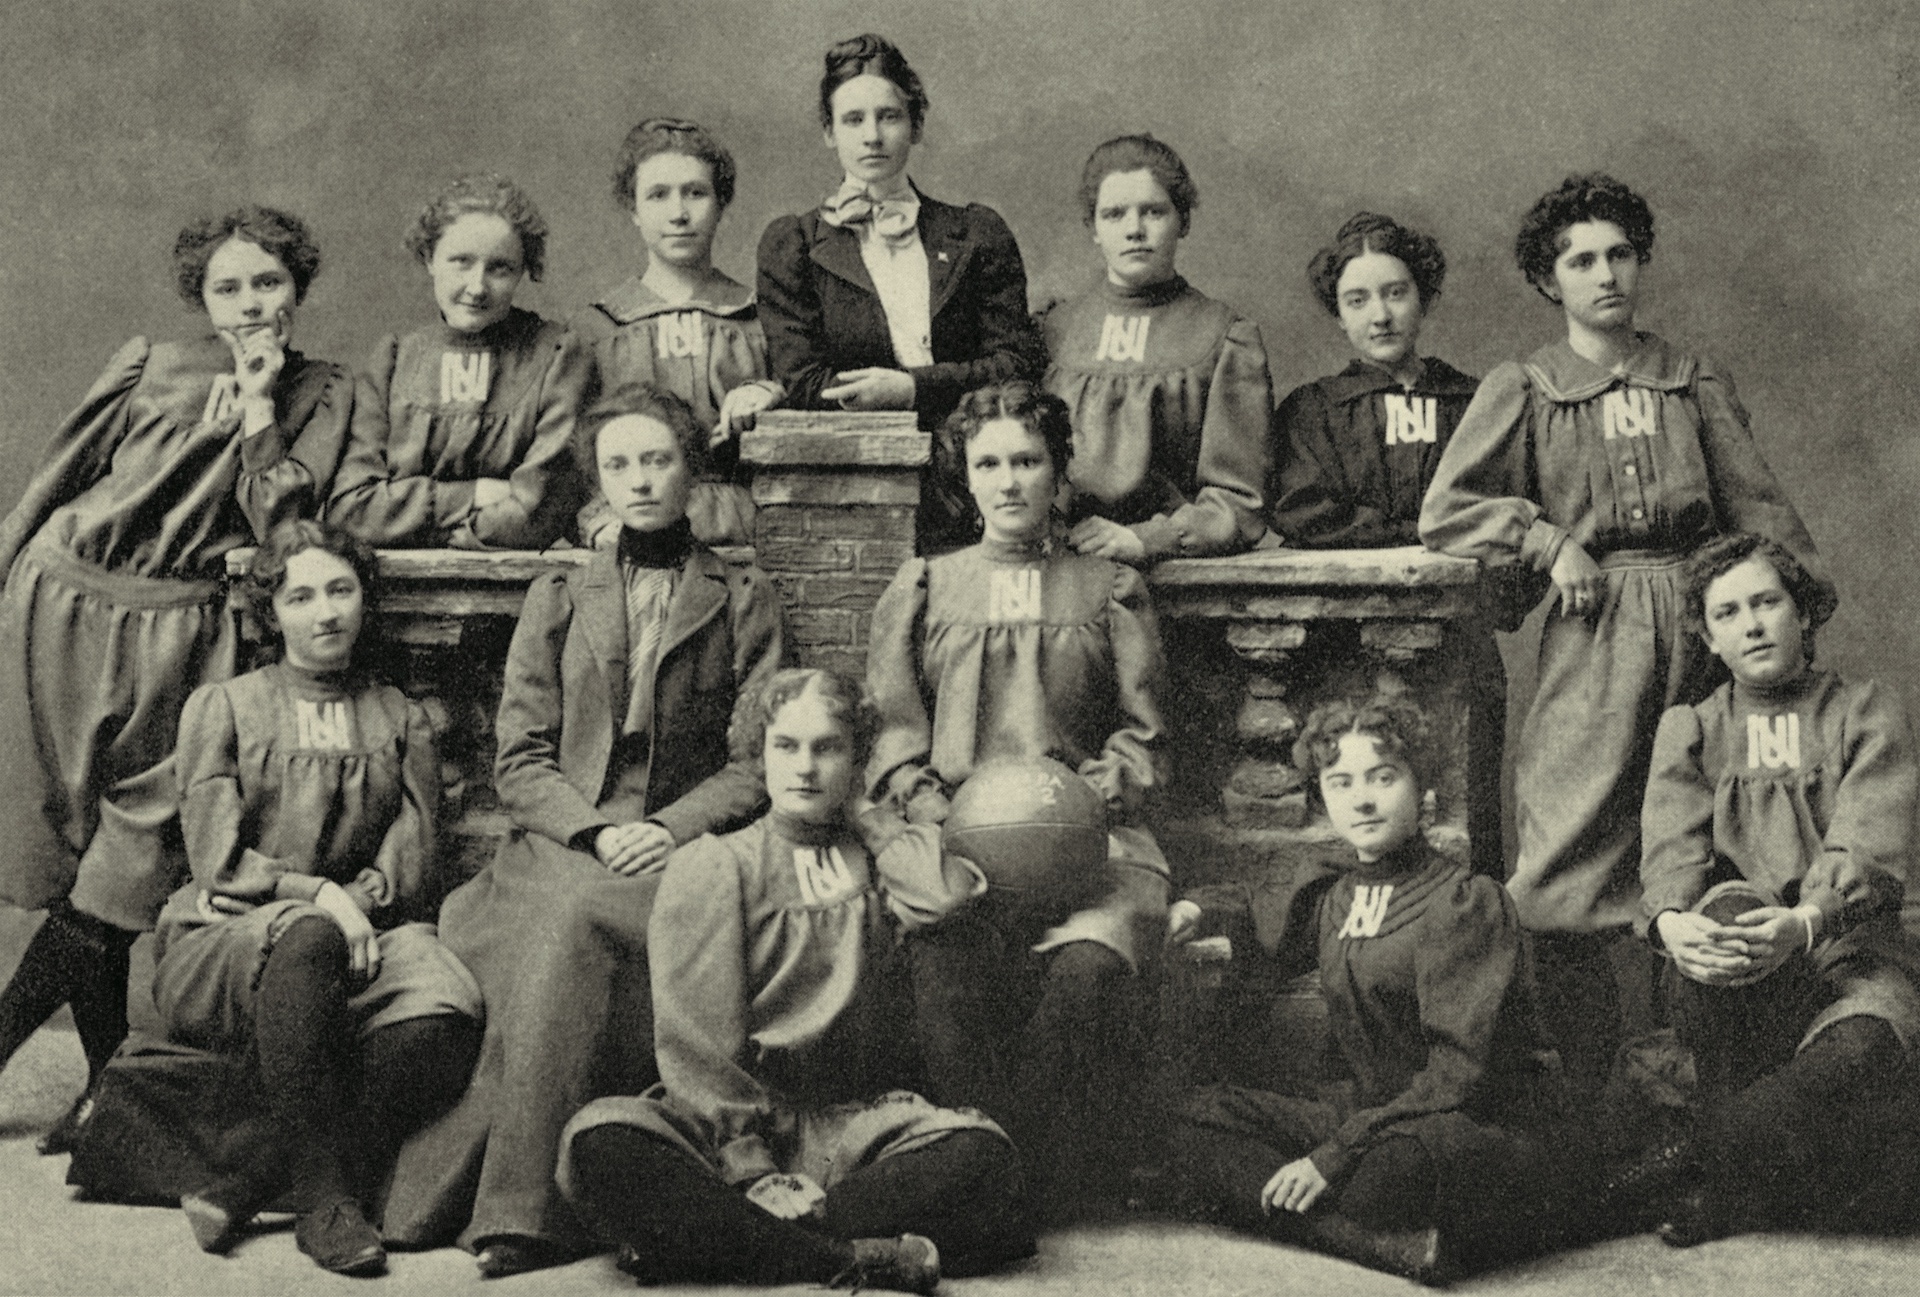 A black and white image of the University of Nevada Women's Basketball team from 1898.